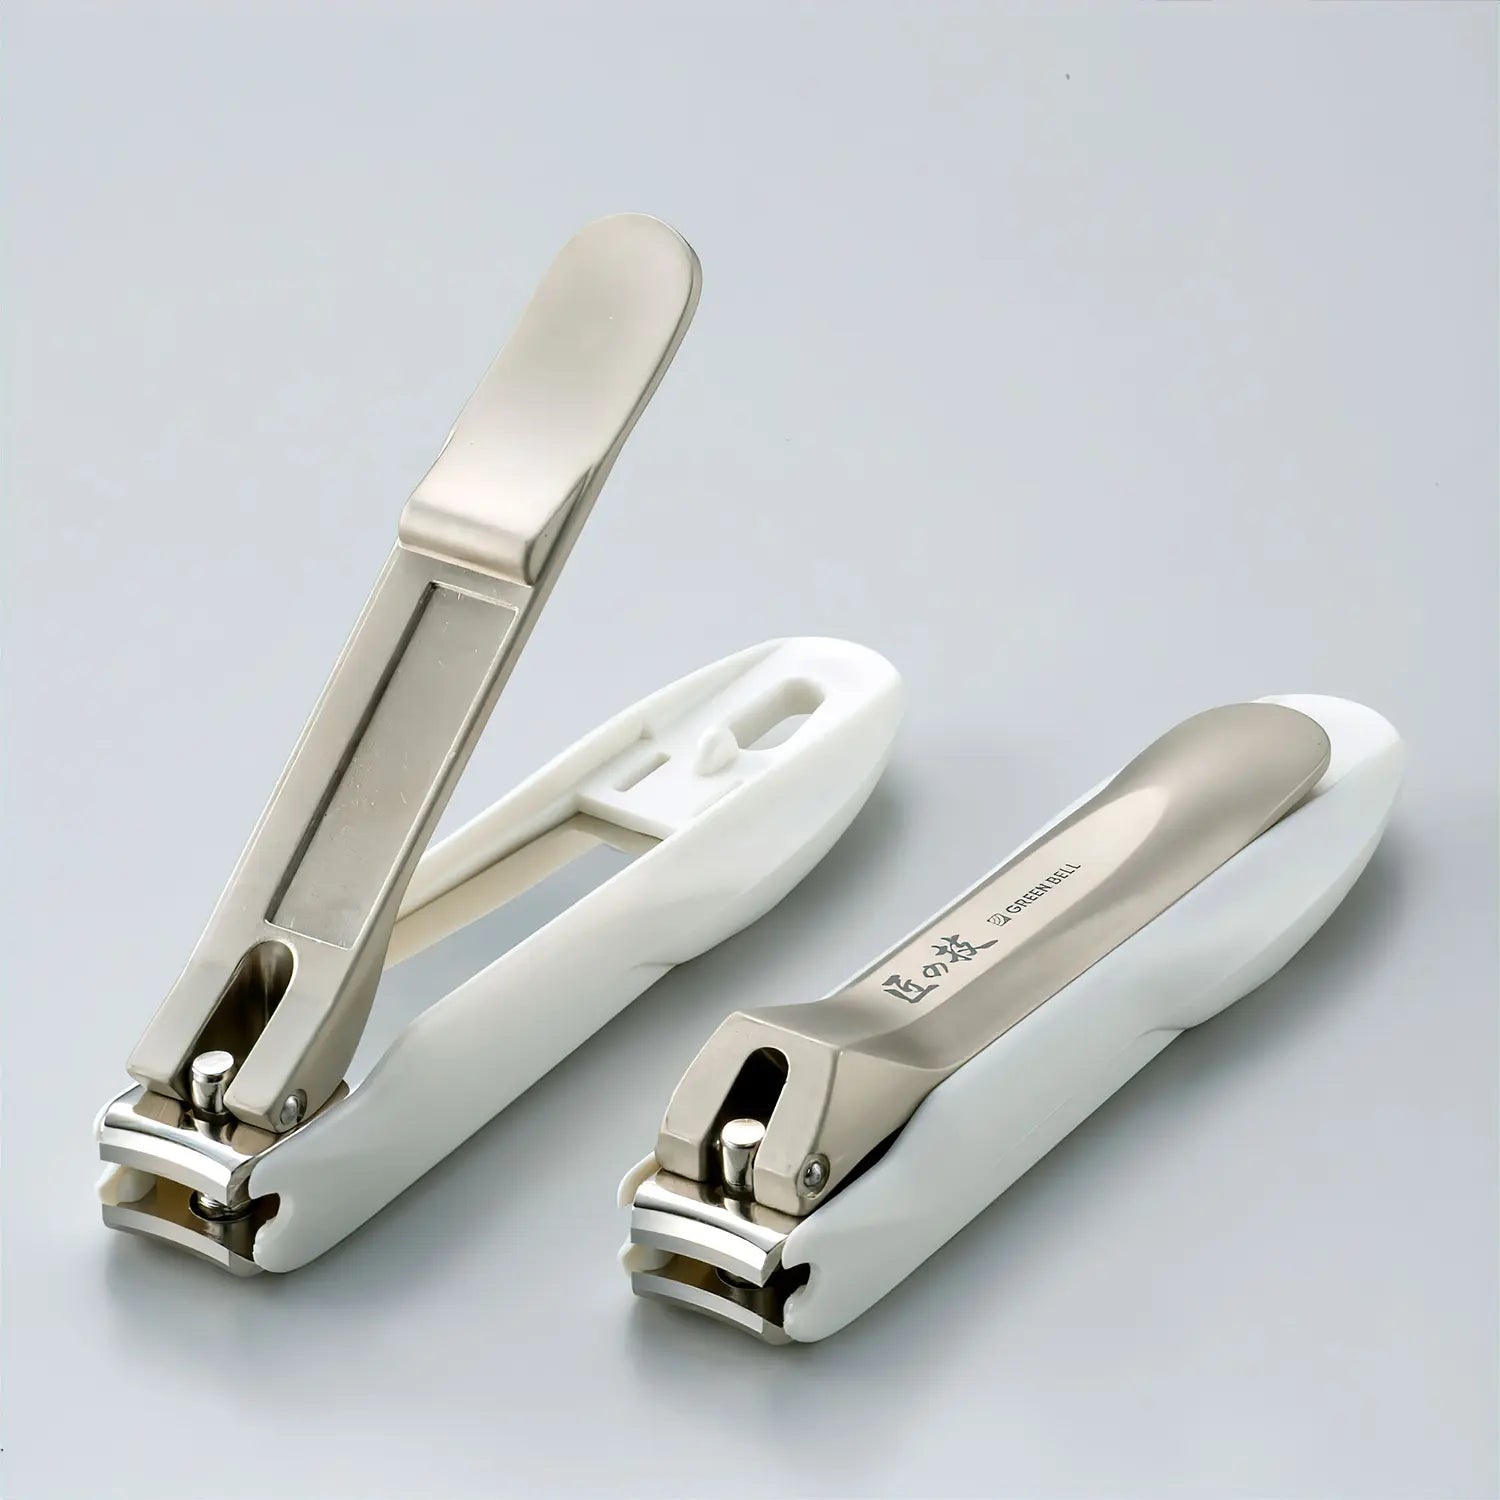 Buy MK 1Pc of Original Imported Bell Nail Clipper Nail Cutter (Exactly Same  as In Image) - 1 Pc (Color May Vary) Online at Low Prices in India -  Amazon.in